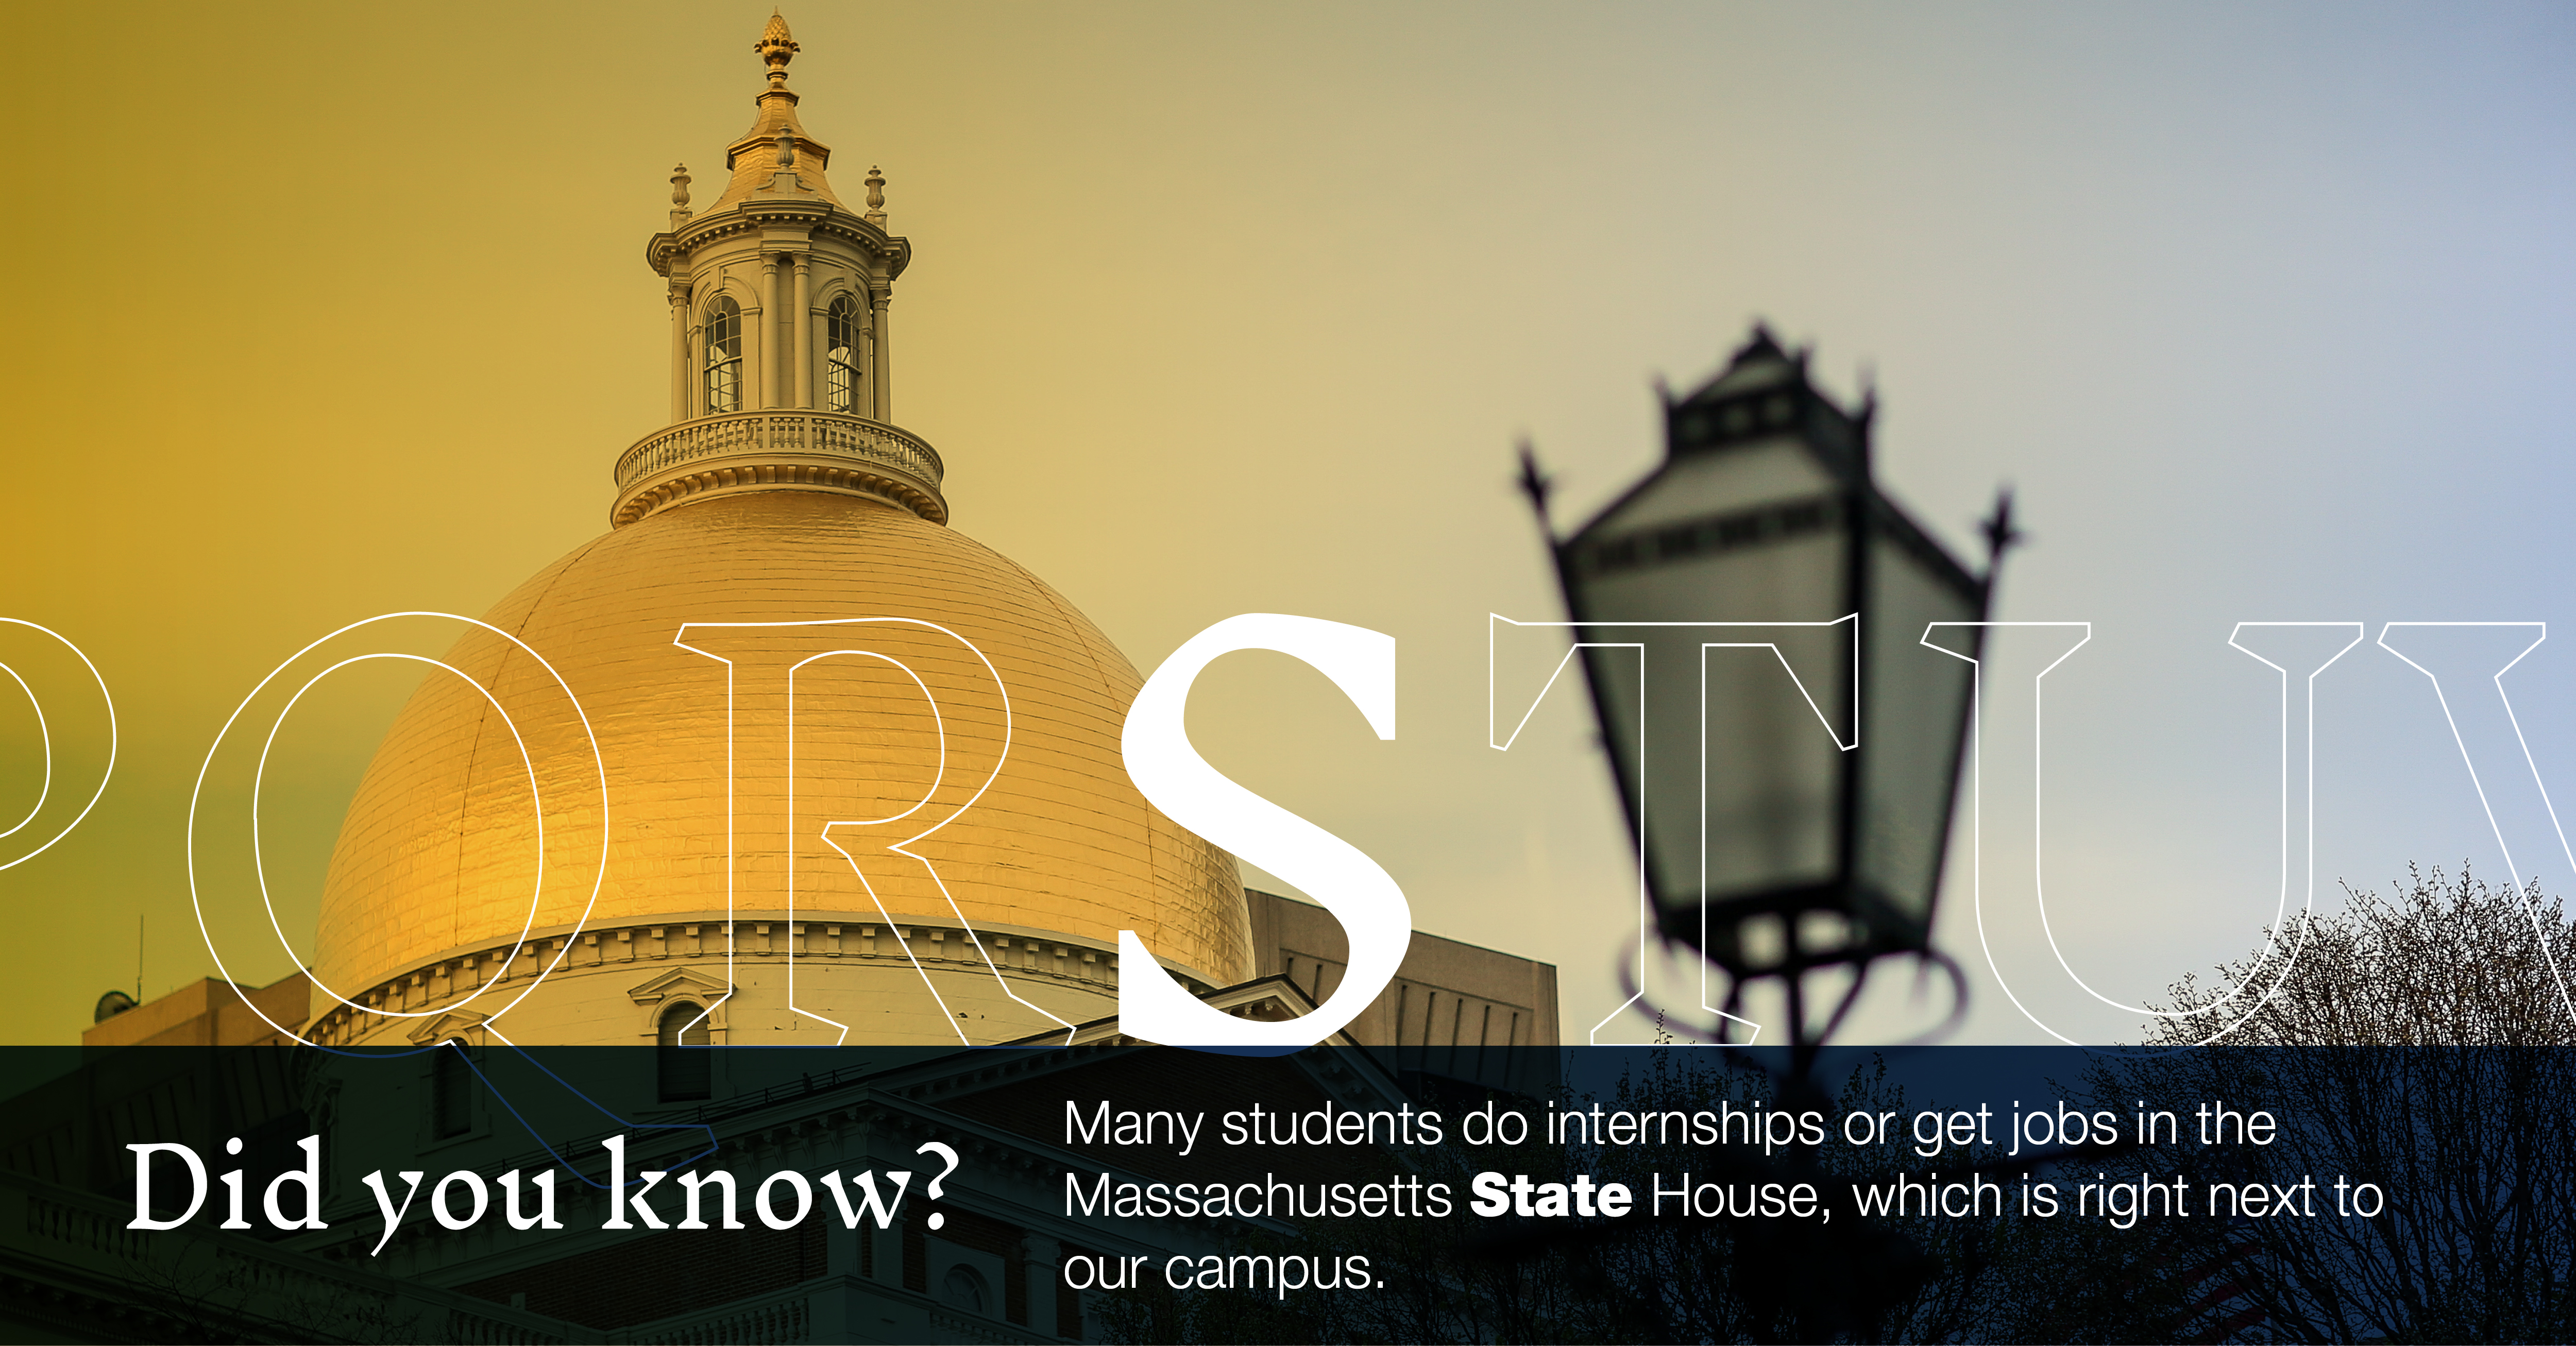 S: [image of the Mass. State House dome] Did you know that many students do internships or get jobs in the Massachusetts State House, which is right next to our campus?